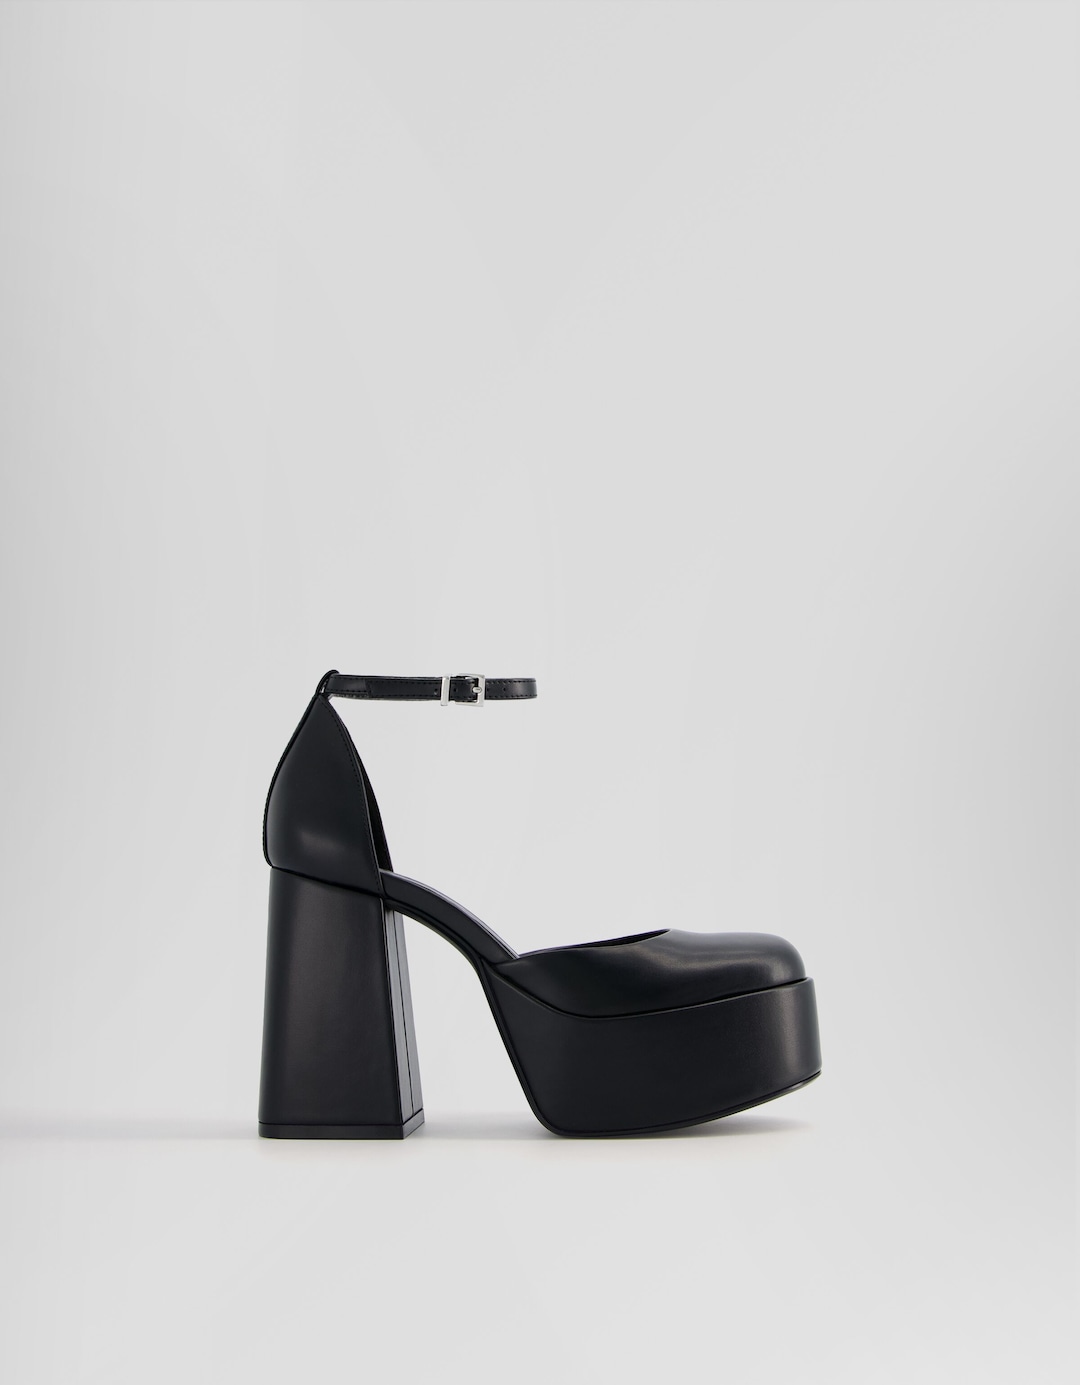 XL platform high-heel shoes with ankle strap